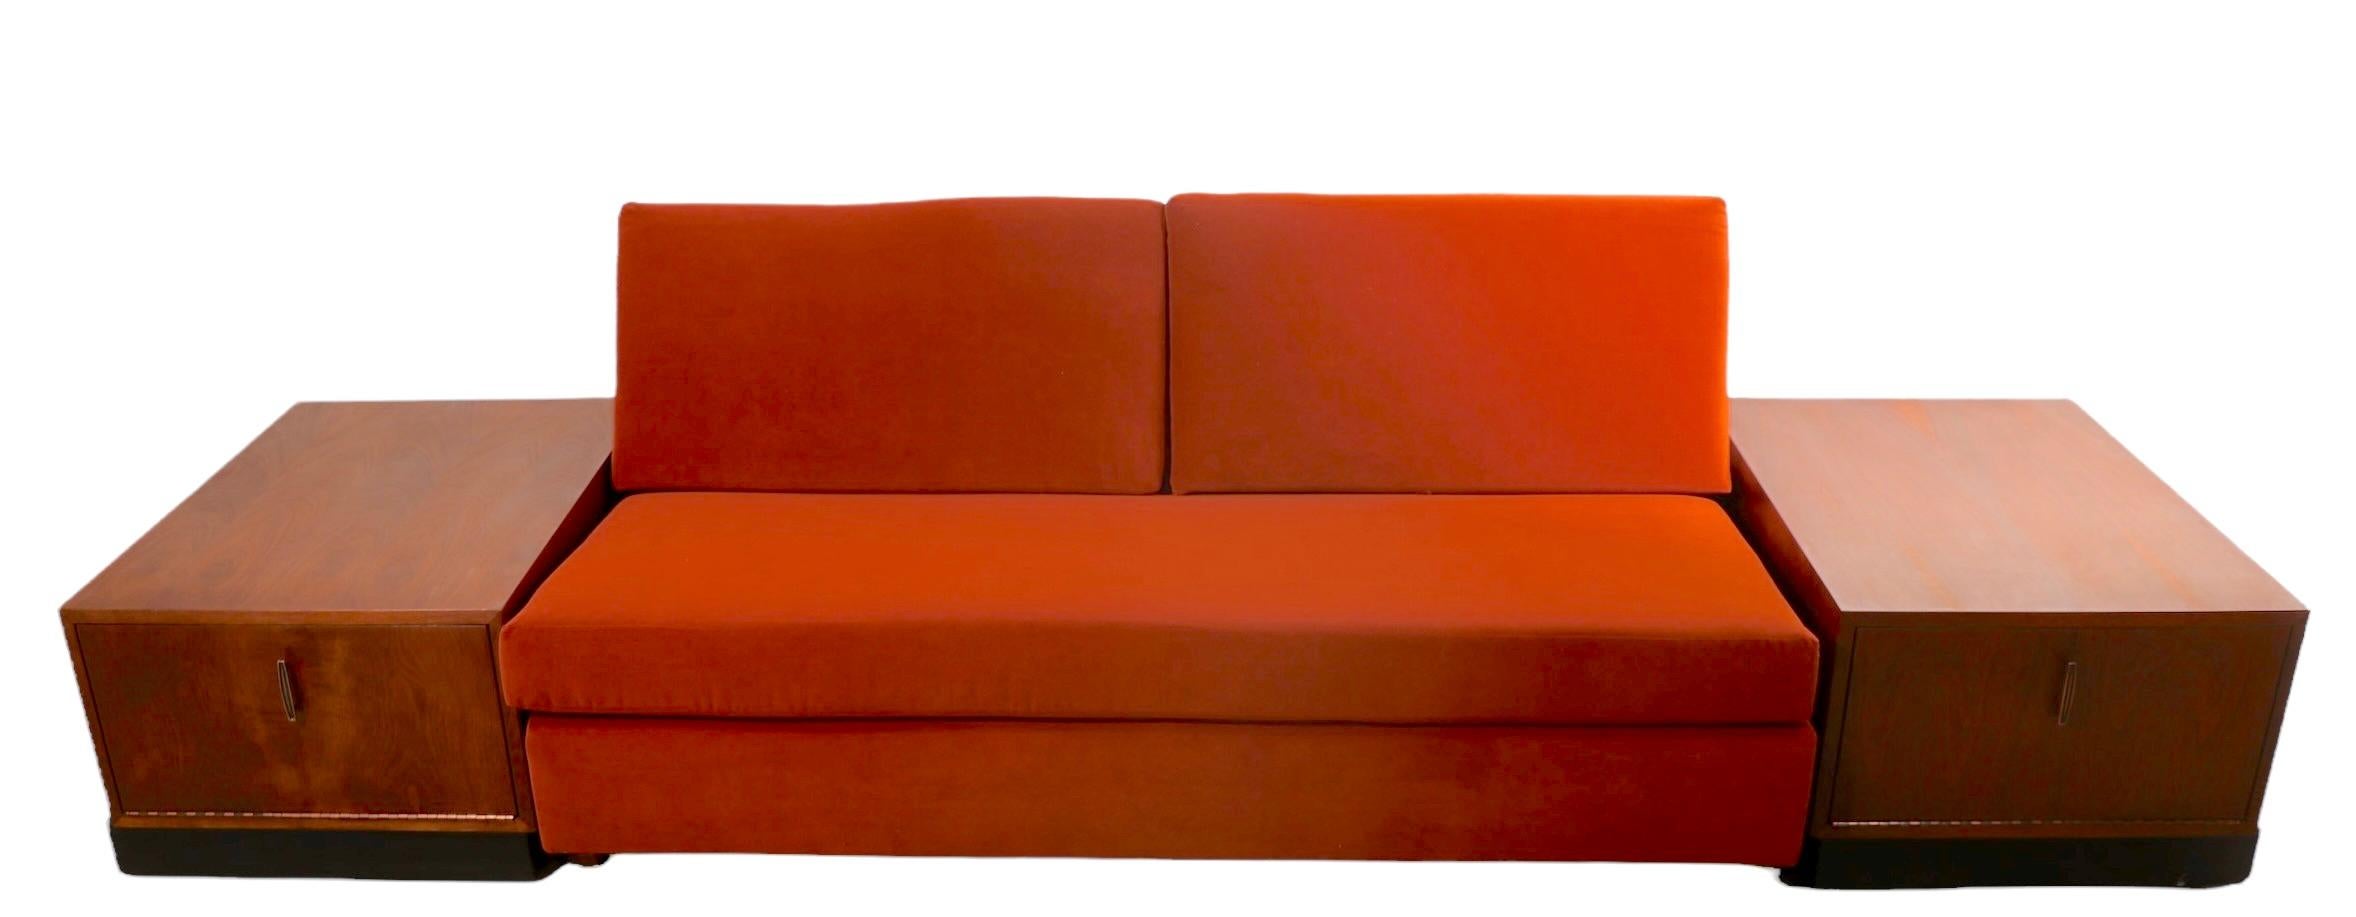 Bench Sofa with Storage Cabinets by Adrian Pearsall for Craft Associates 7